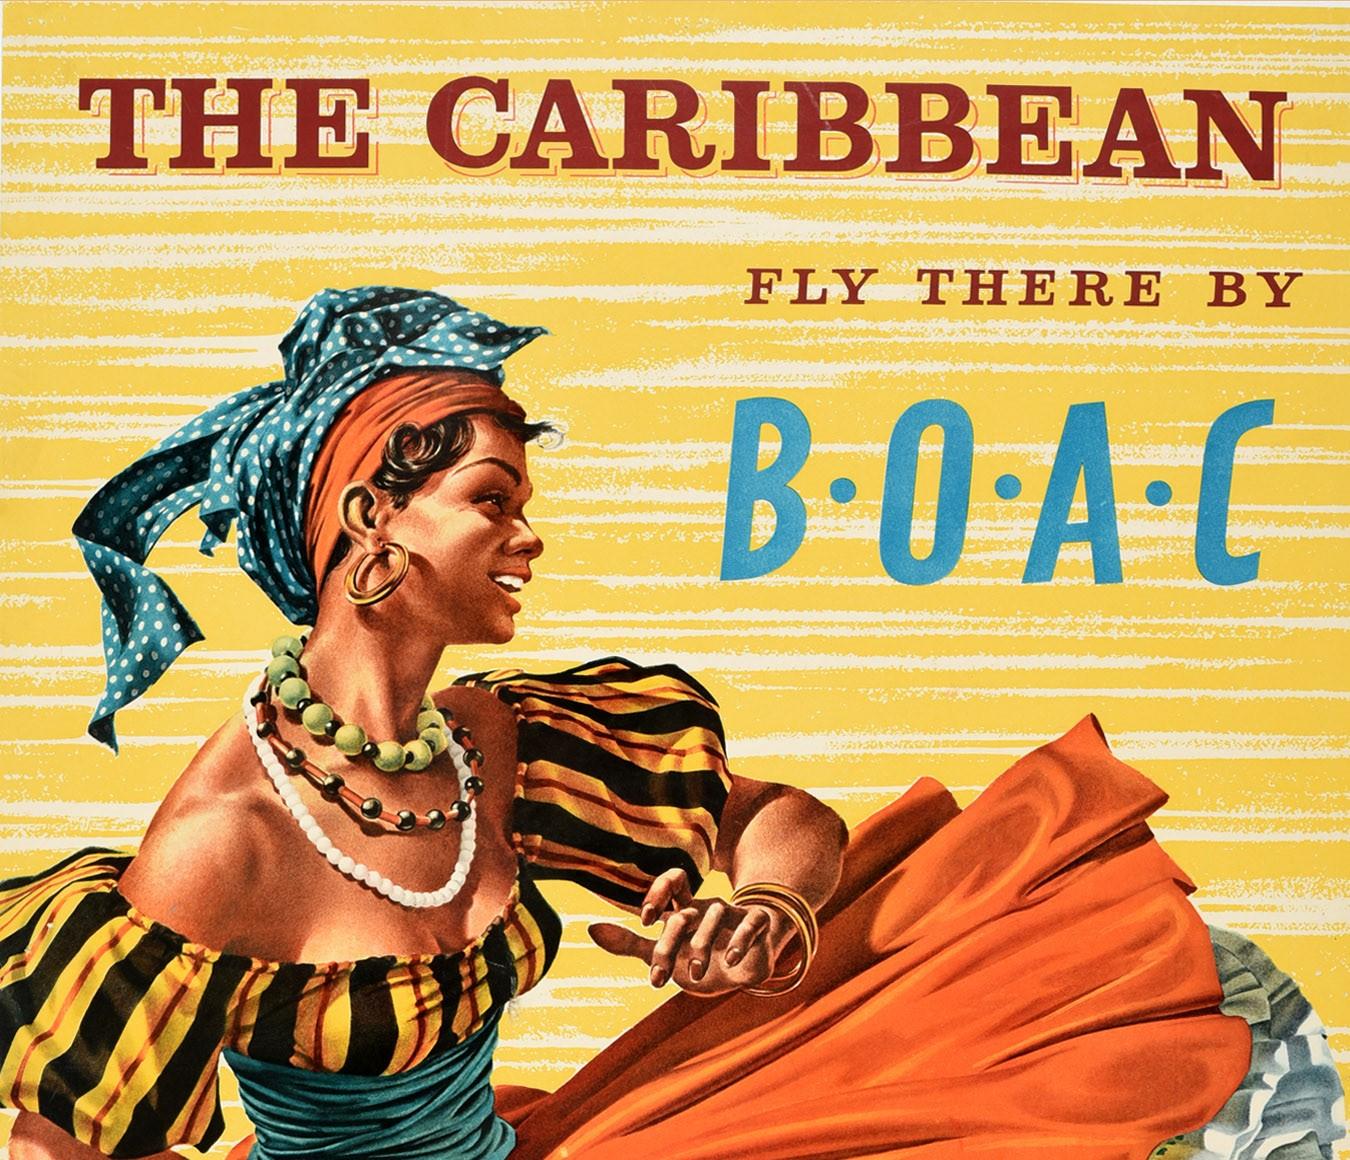 Original Vintage Poster The Caribbean Fly There By BOAC Airline Travel Dancer - Print by Hayes